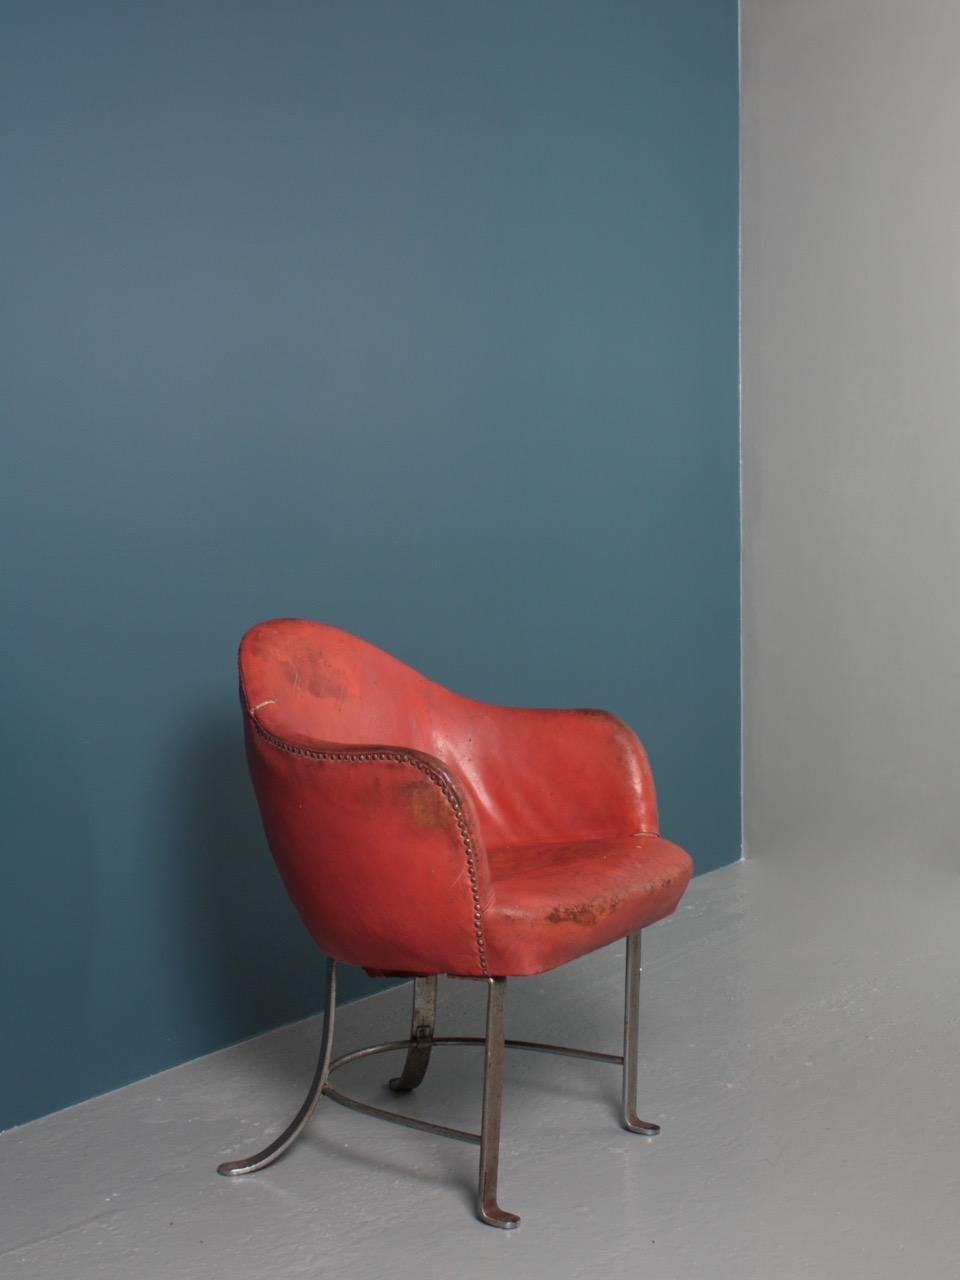 Lounge chair with frame of nickel-plated flat steel, upholstered with original patinated red leather. This chair is designed for Lolland Falsters Industri & Landbrugsbank in 1935.